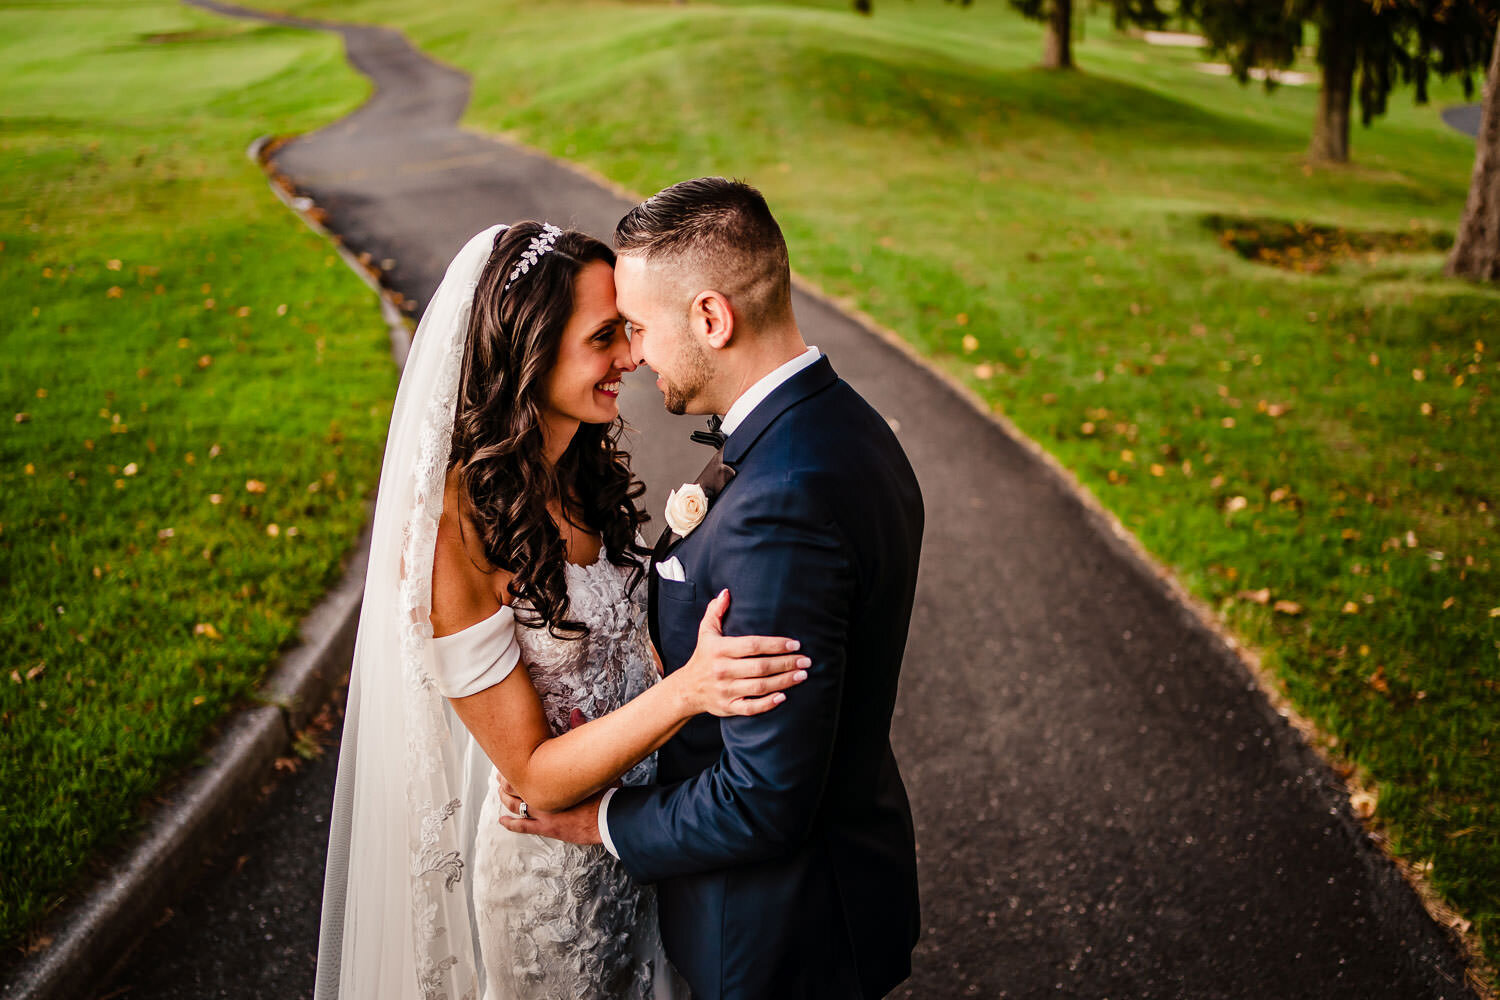 Bride and groom portrait on a golf course path at Royalton on the Greens in Melville on Long Island